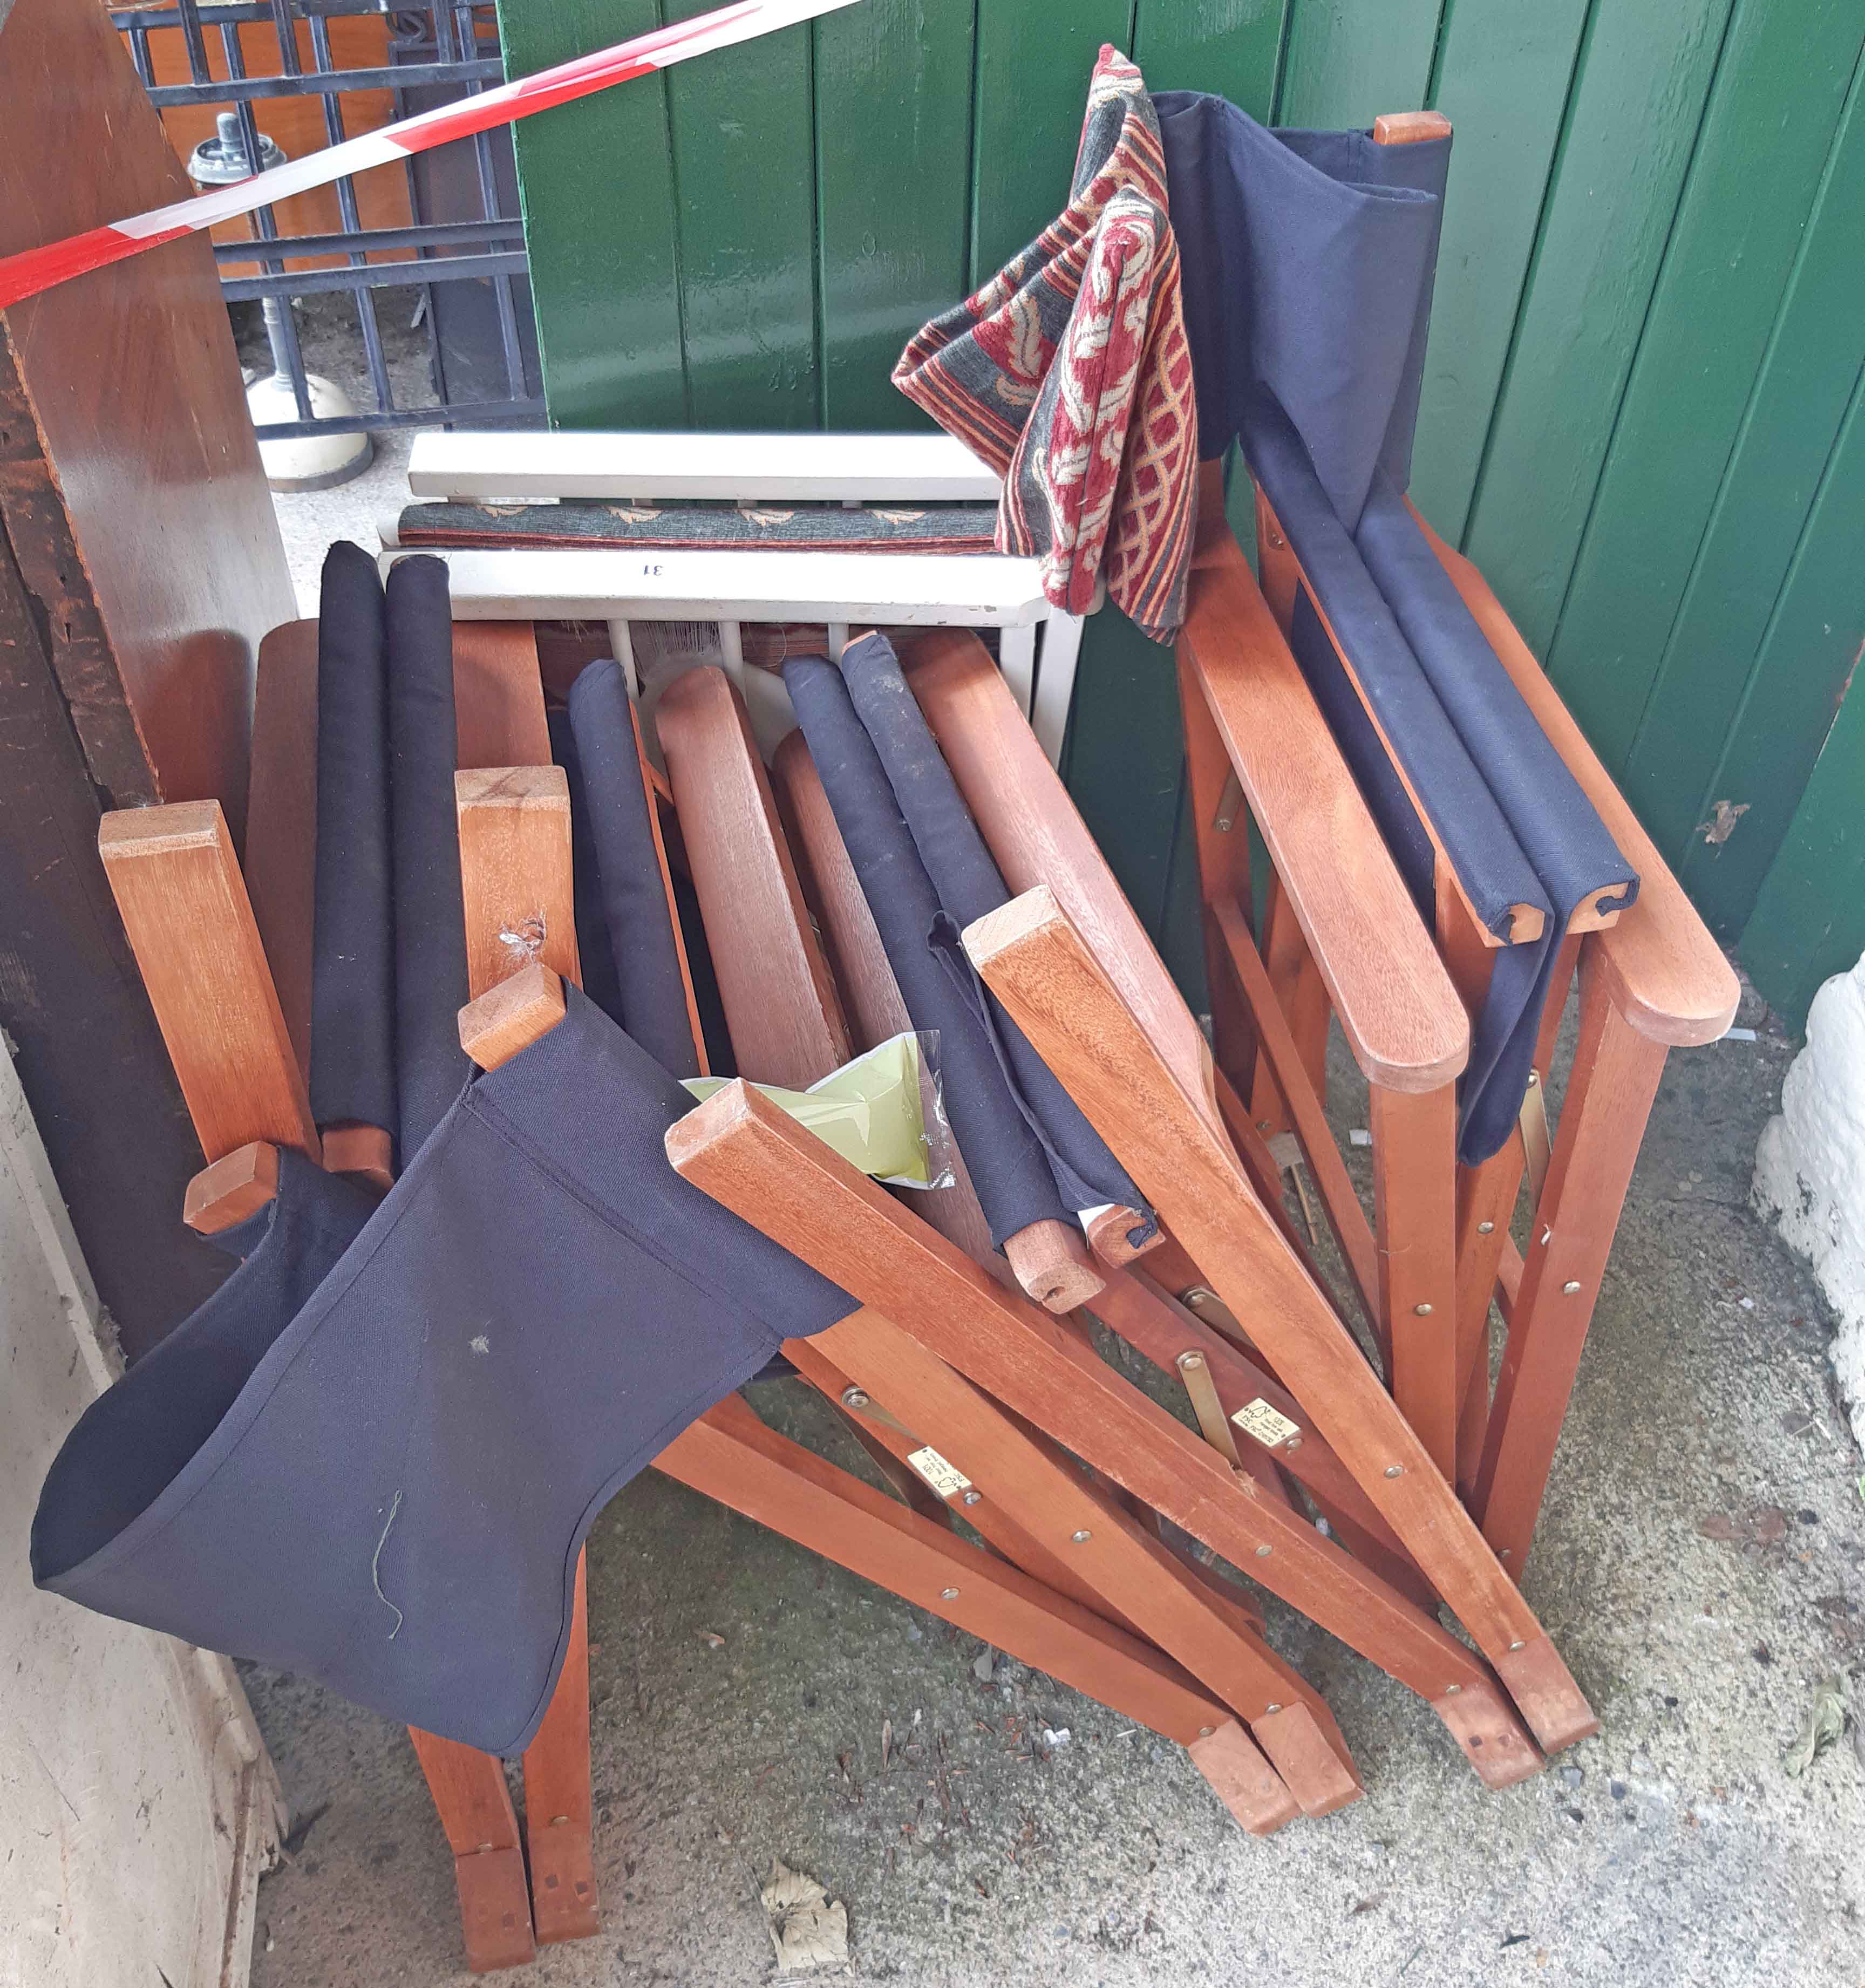 Five director's style folding chairs - various condition